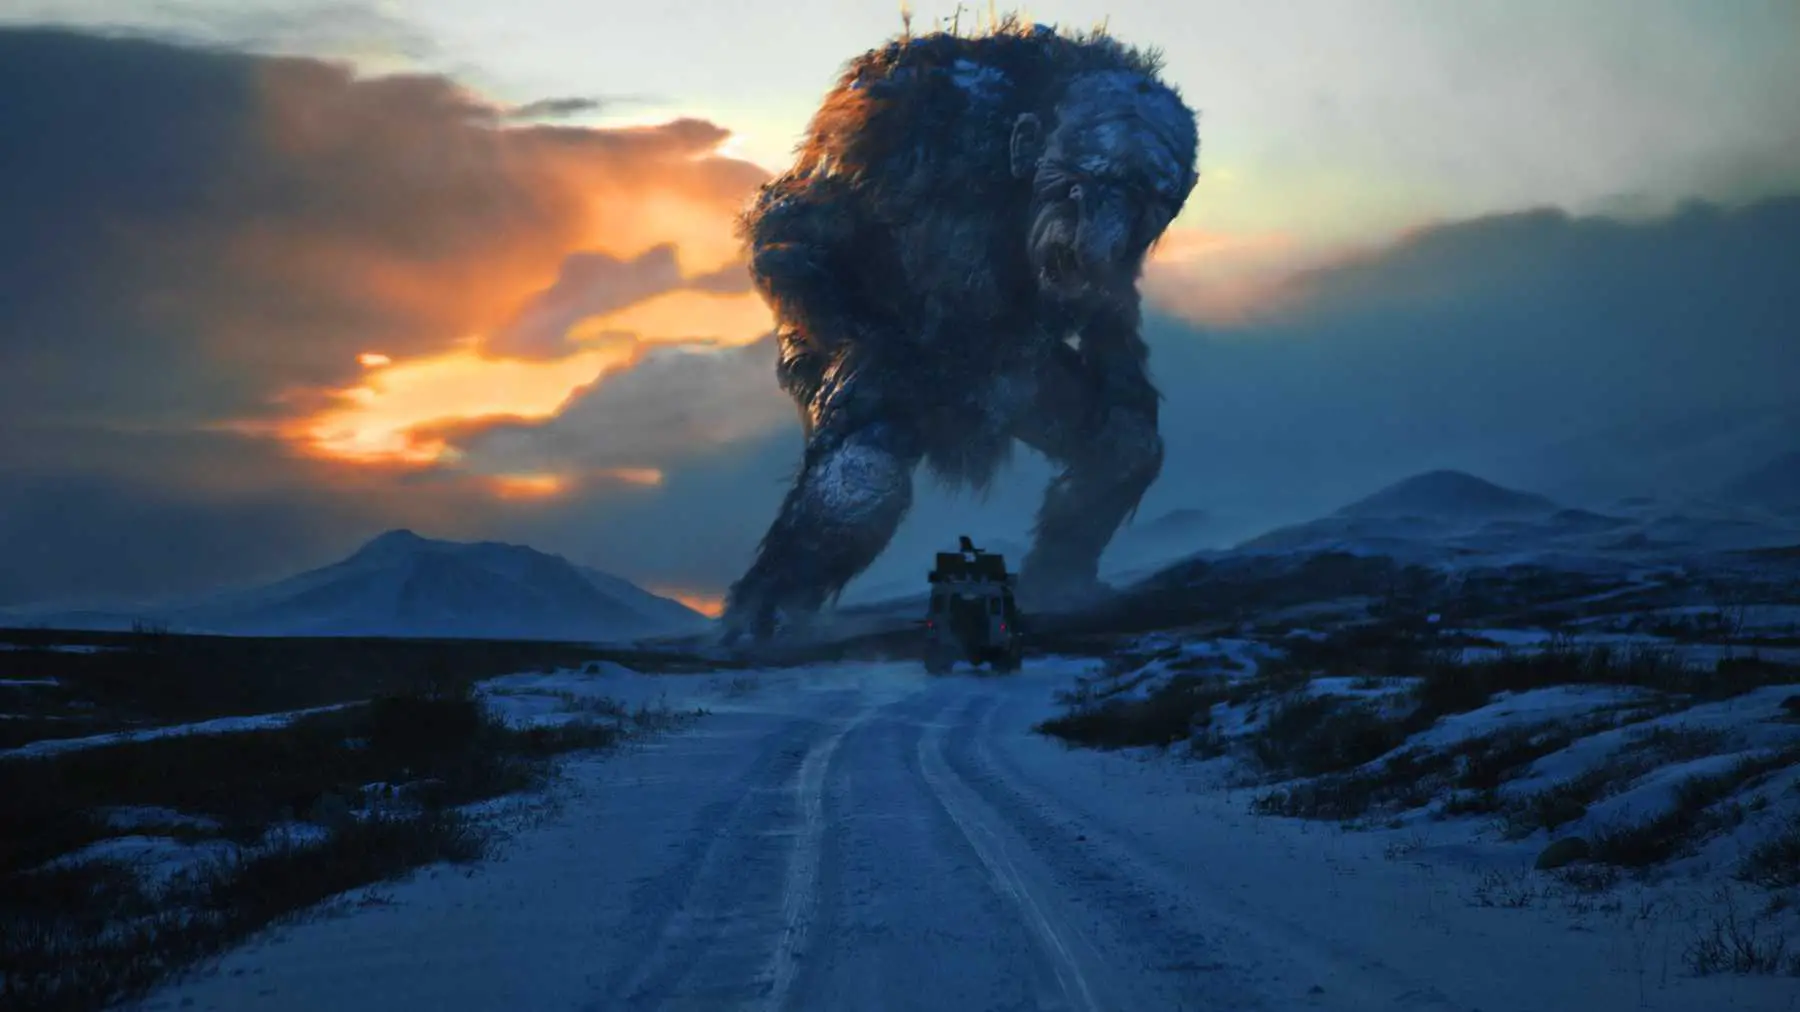 Hans drives his Land Rover along the road in the direction of the gigantic Jotnar